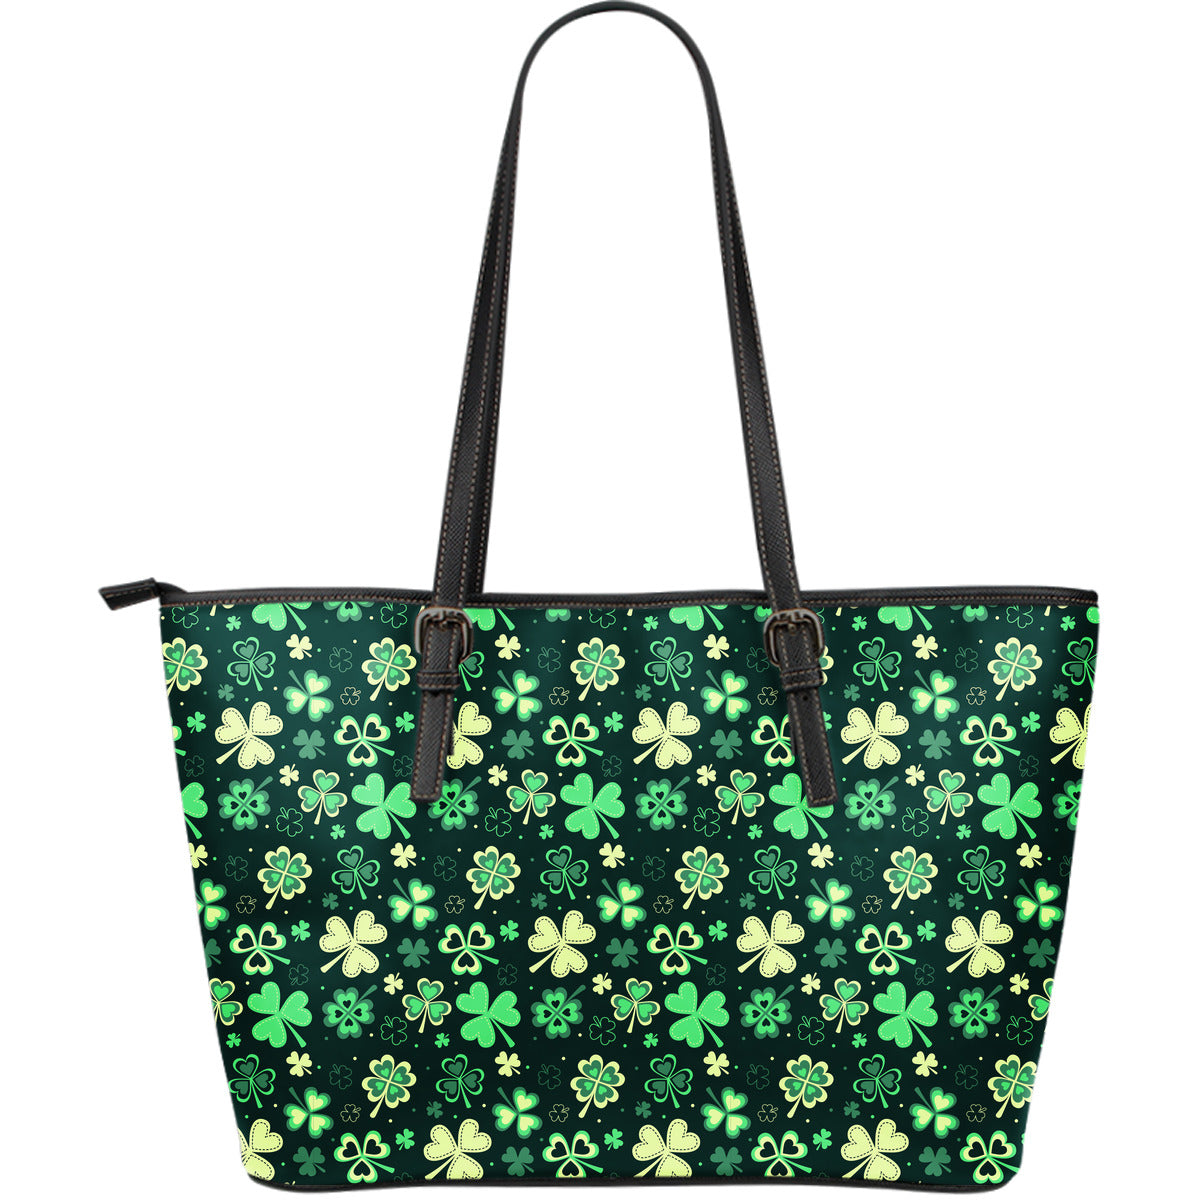 PATRICK LARGE TOTE BAGS - JaZazzy 